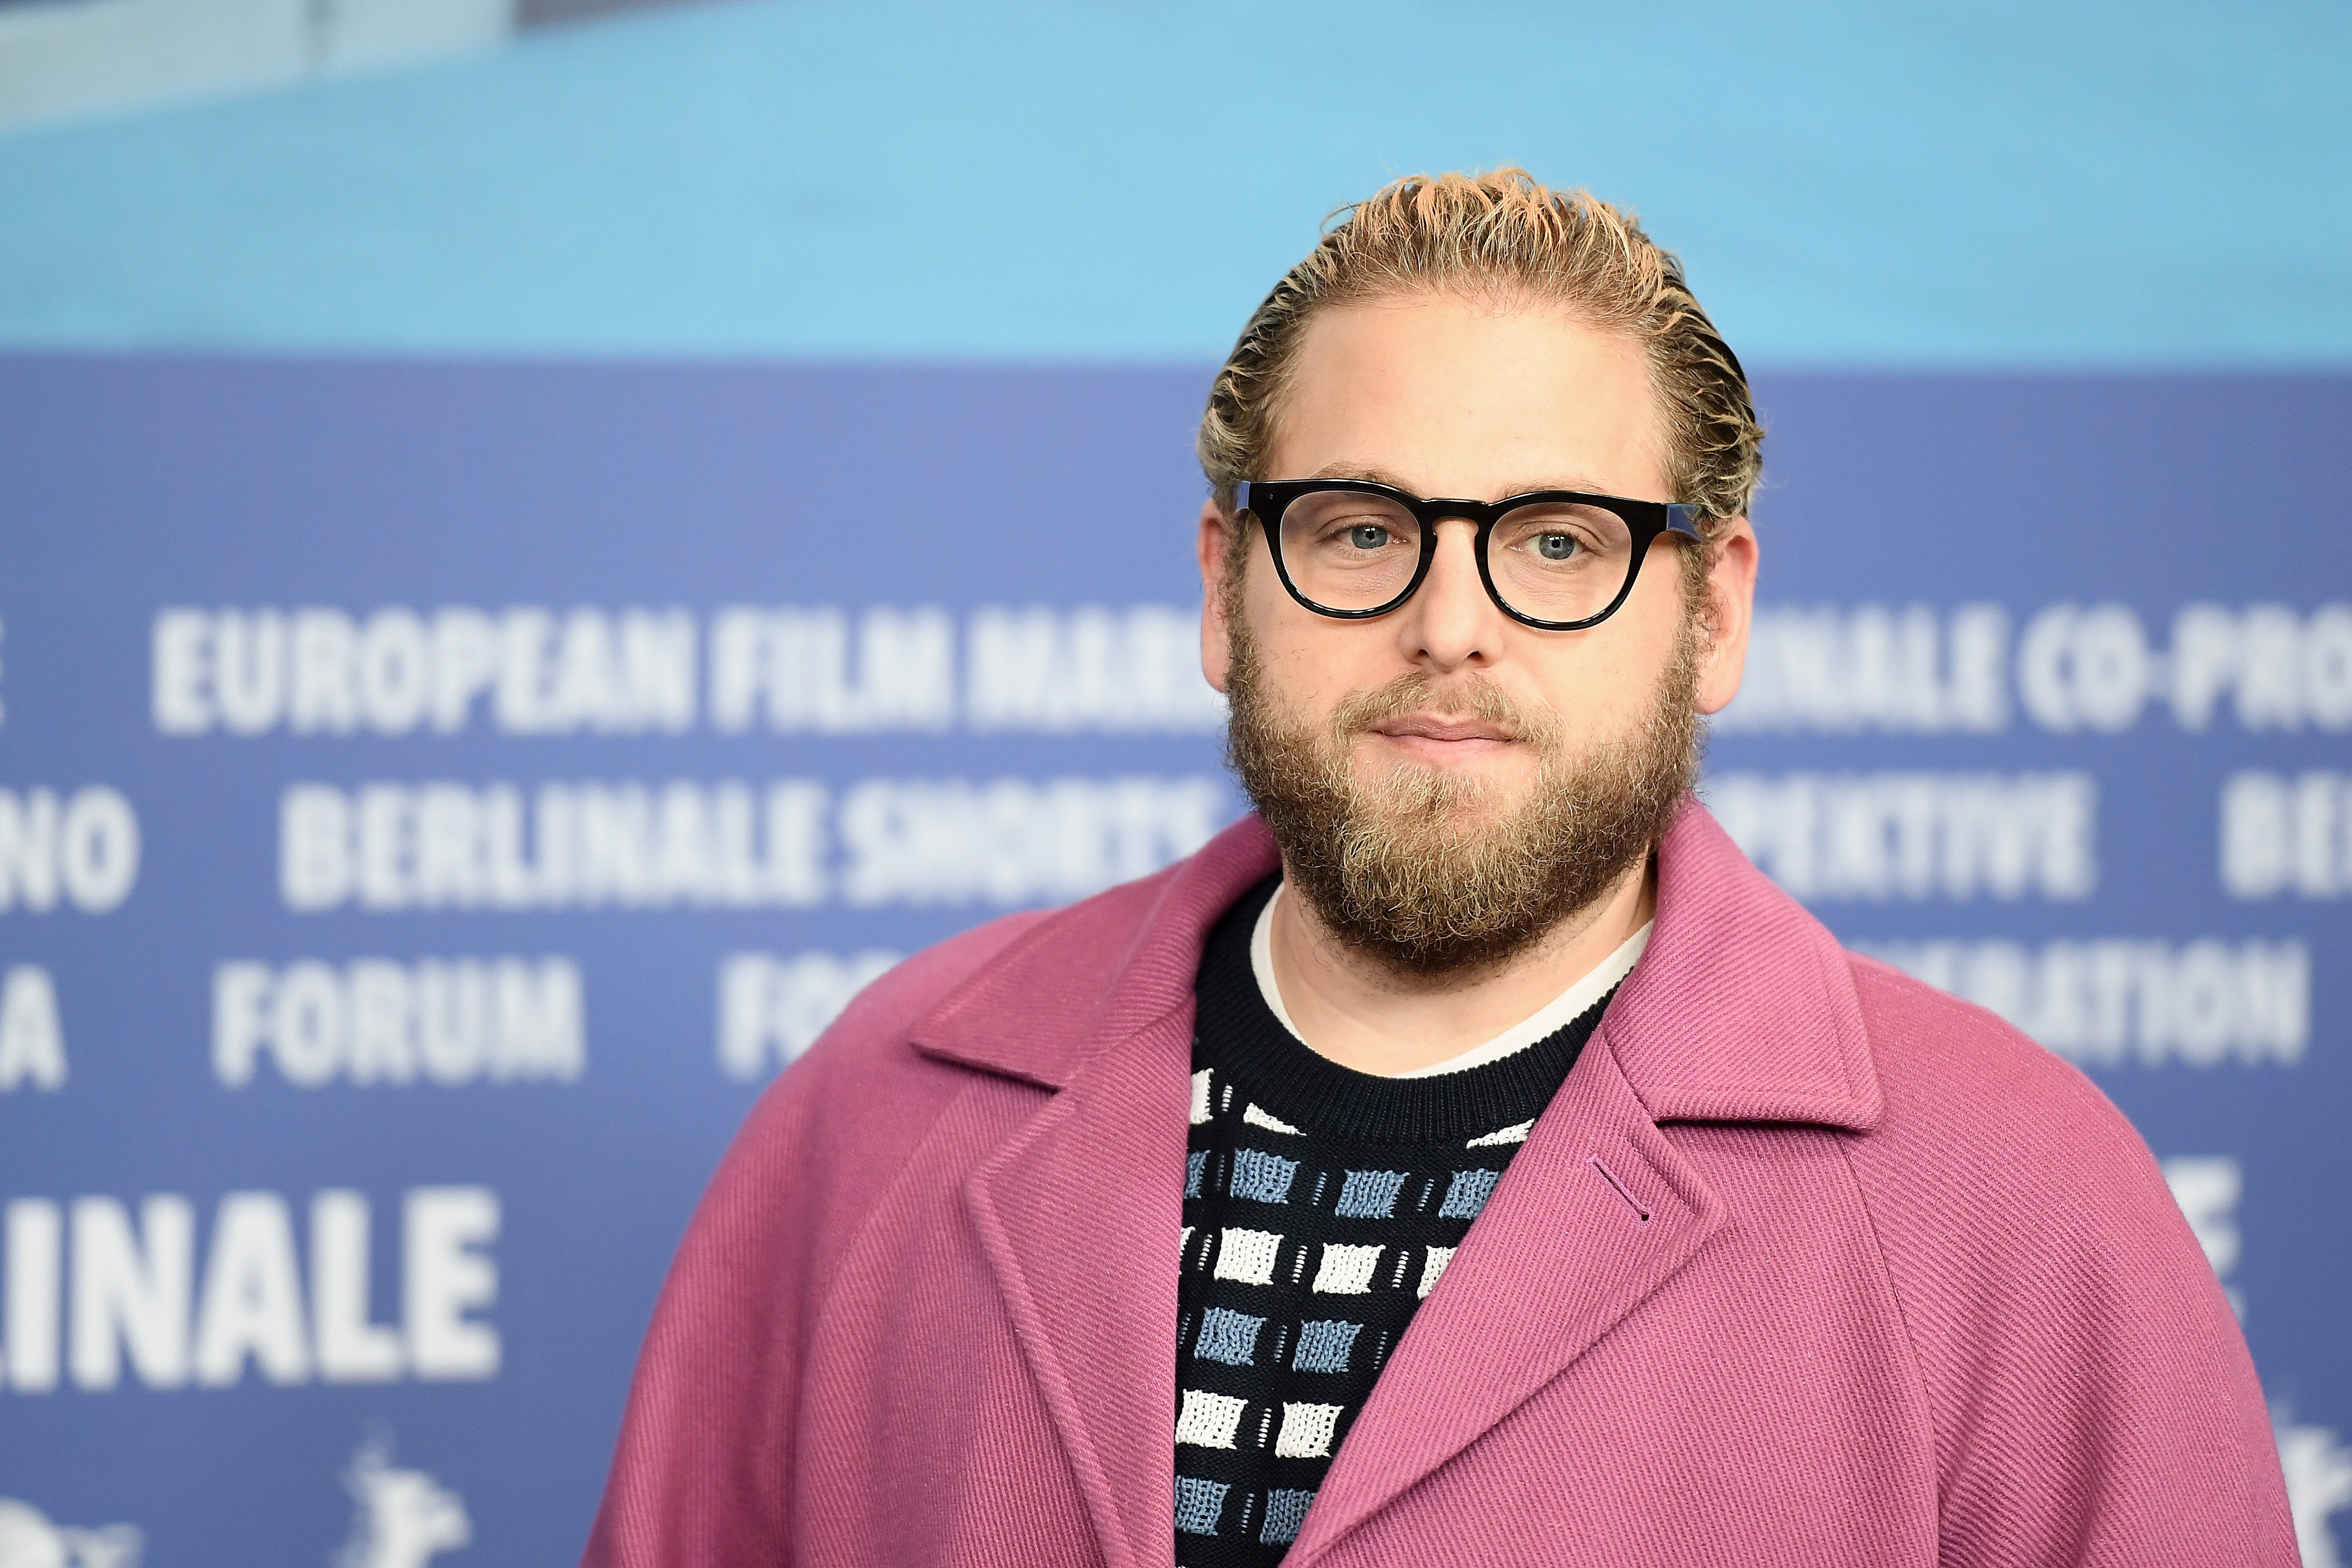 Jonah Hill slams back on the beach day photos focused on his body: ‘Can’t phase me anymore’